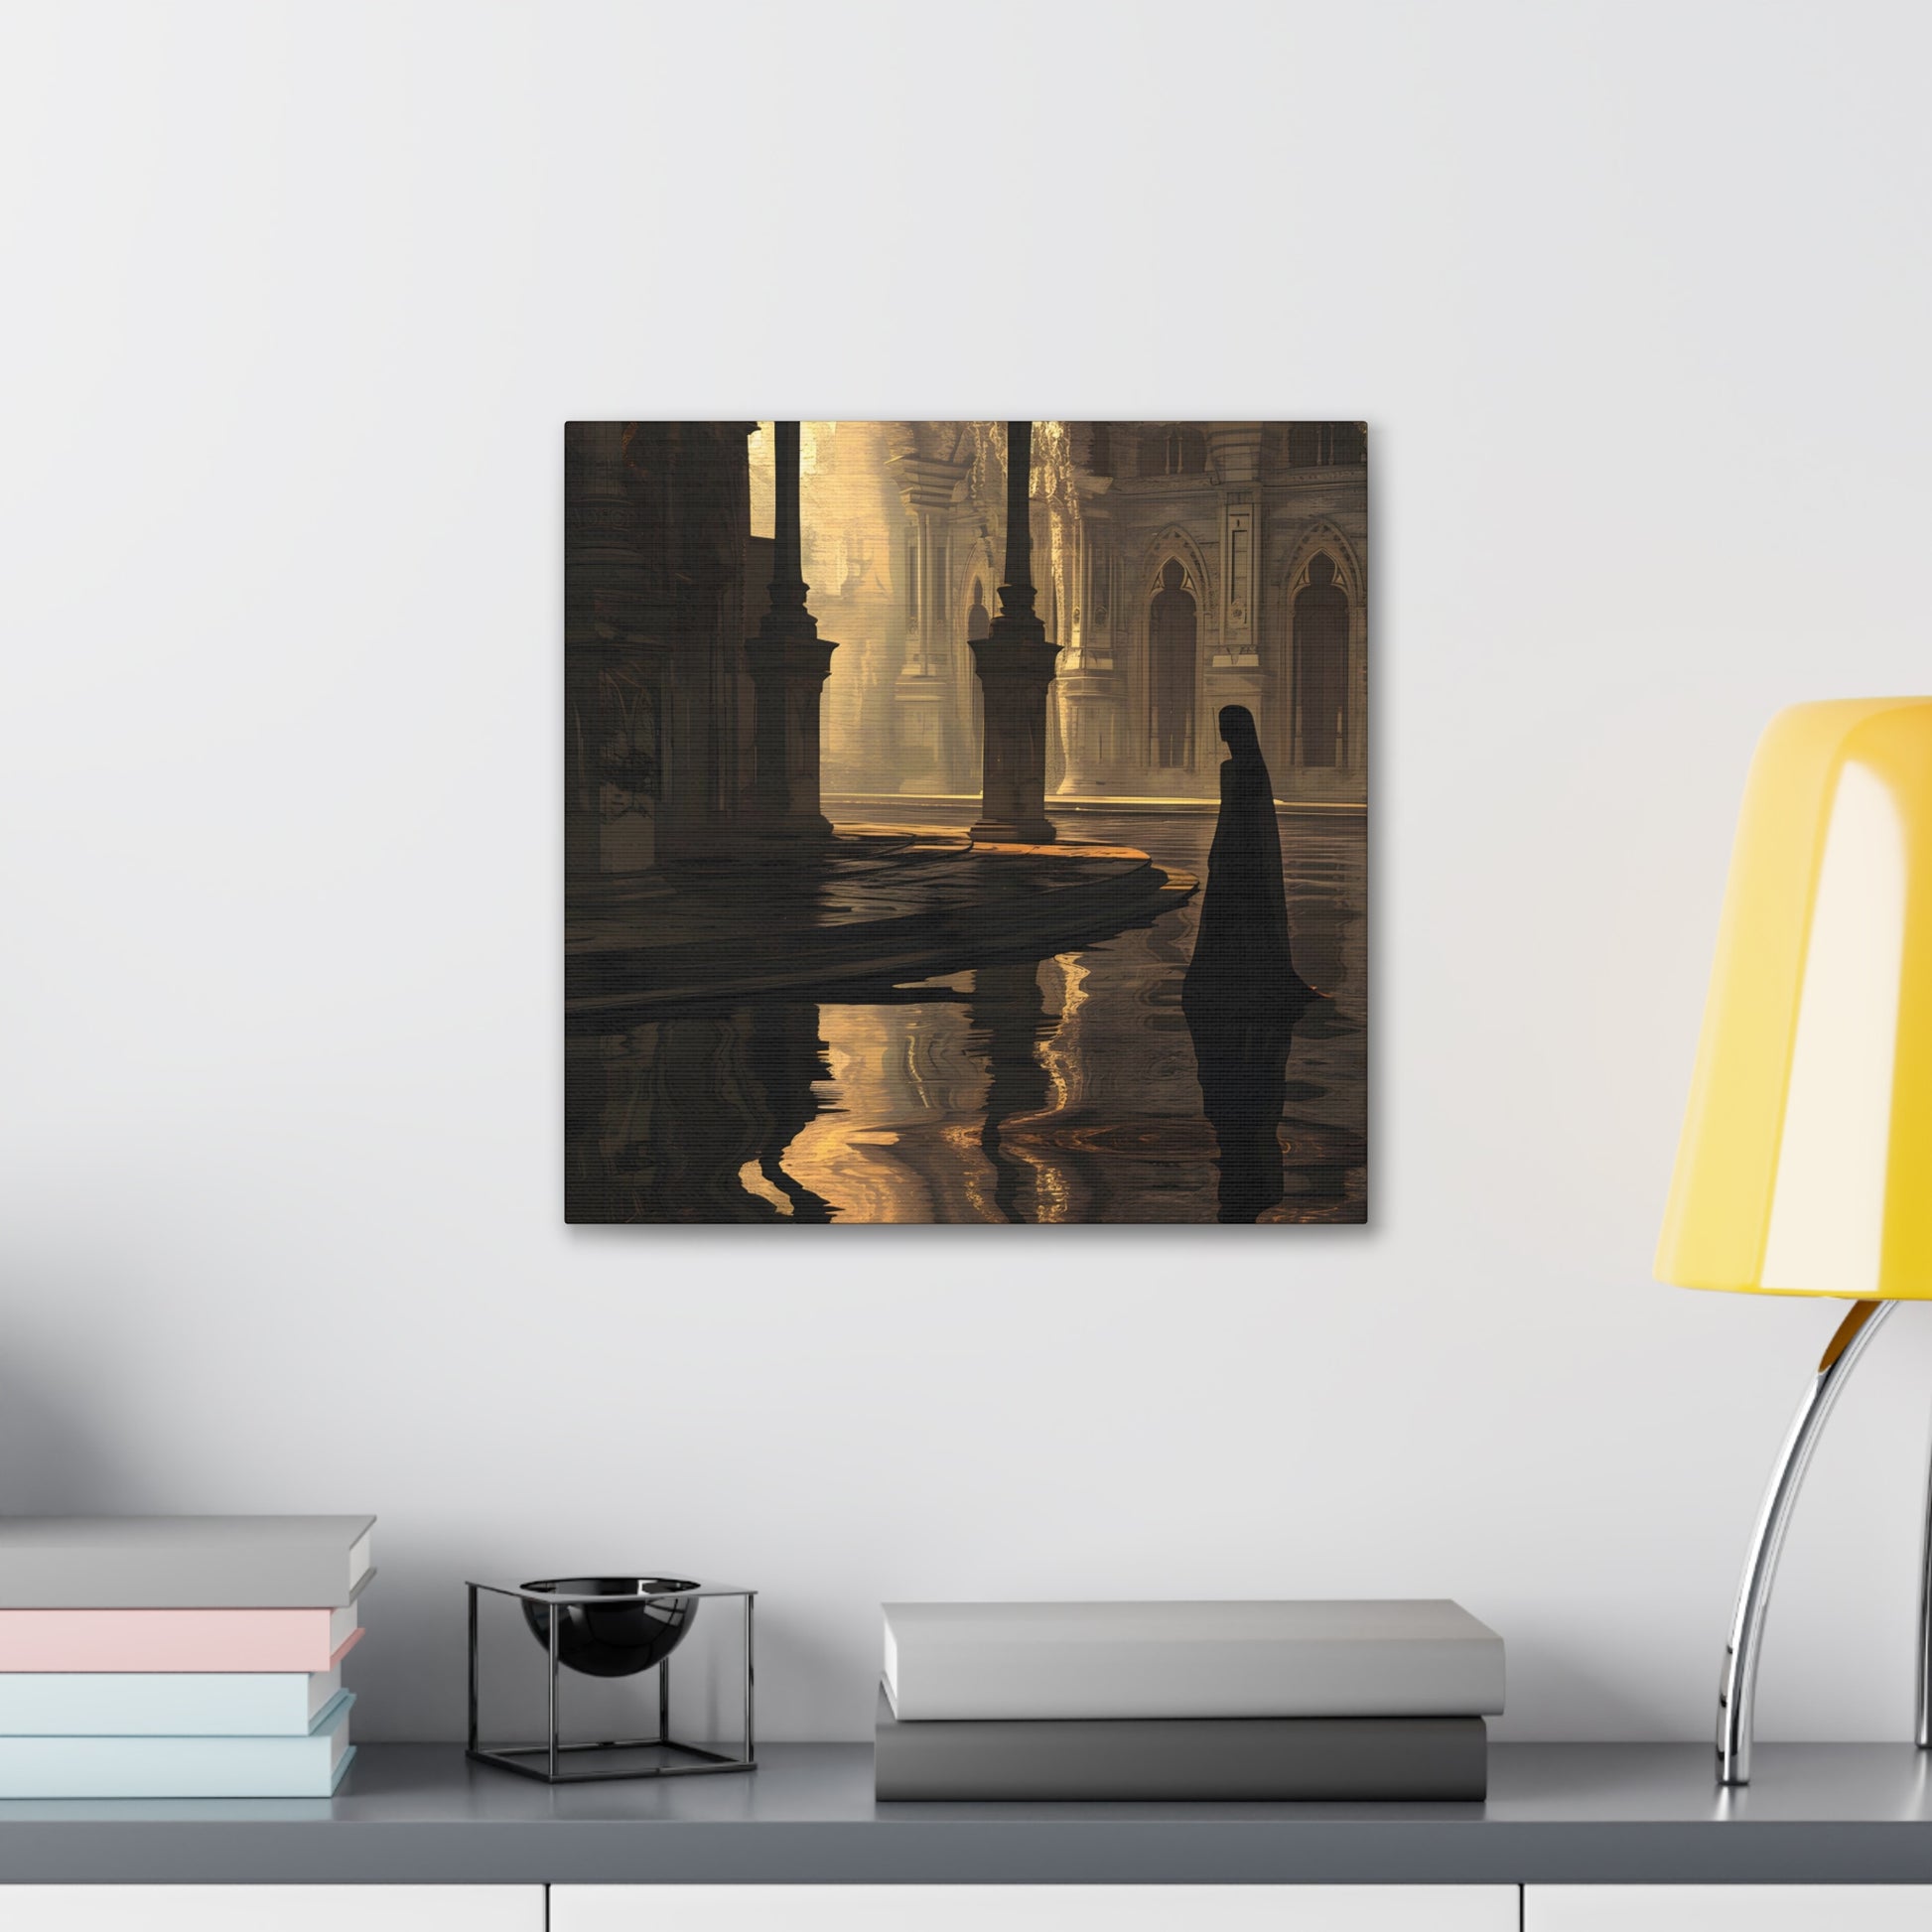 Avery Pennington's artwork of a golden-lit, flooded cathedral with a solitary figure in black, blending Gothic architecture with reflections in water, evoking solitude and introspection